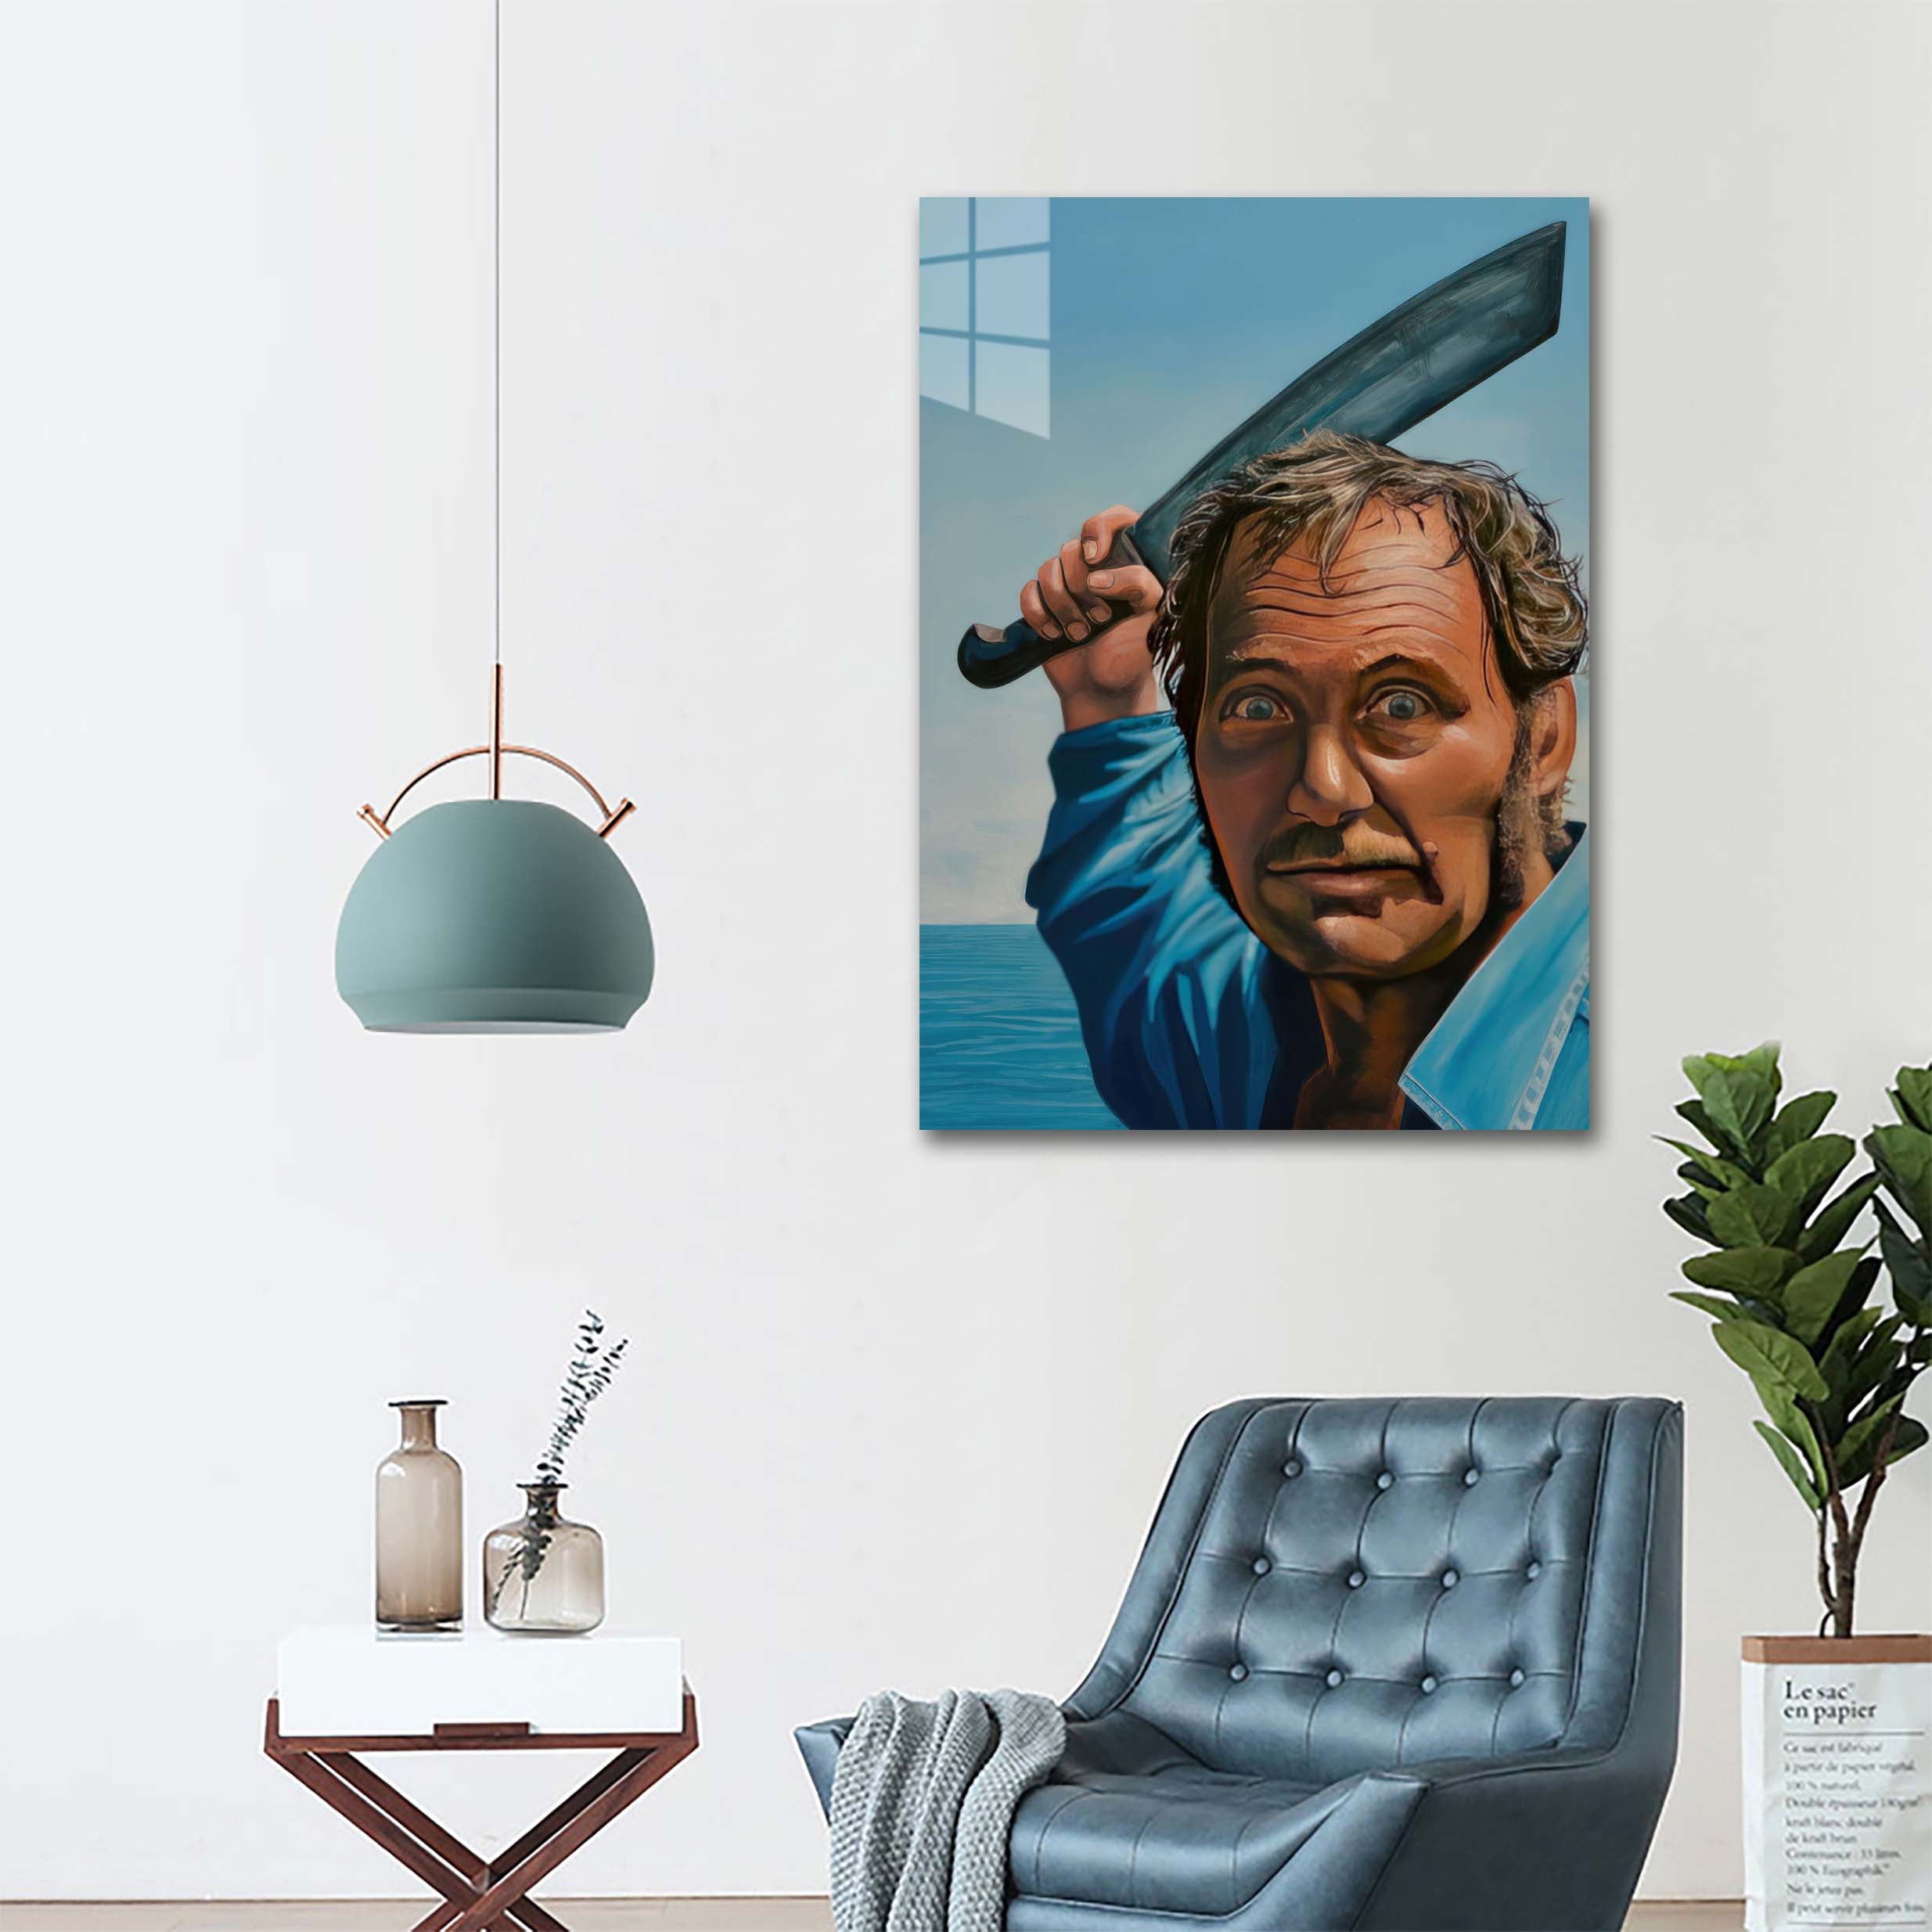 Robert shaw in jaws-designed by @Vinahayum